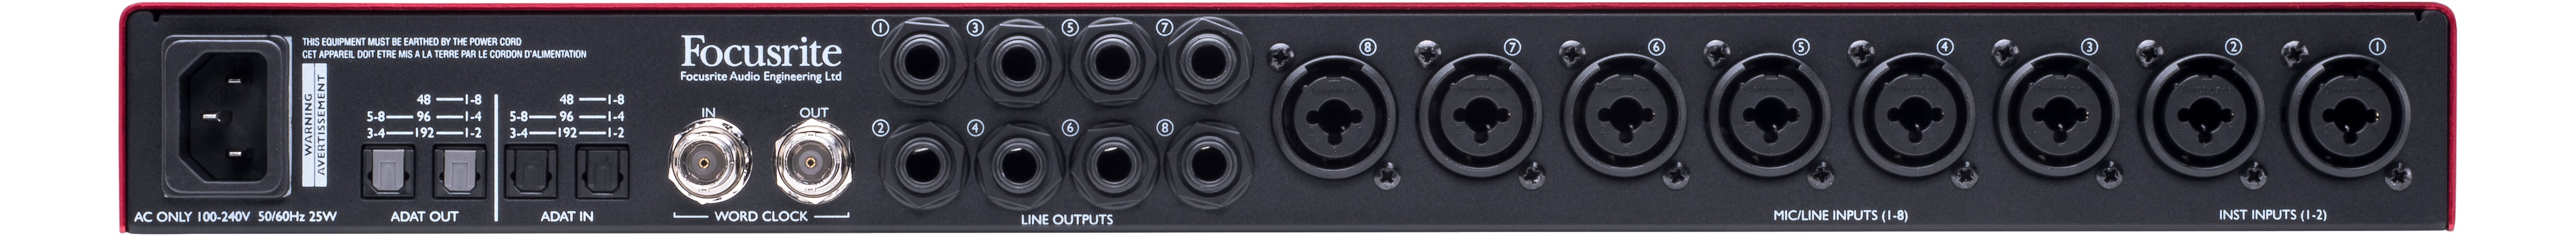 Focusrite Scarlett OctoPre Dynamic Eight-Channel Mic Pre With A-D/D-A  Conversion and Analogue Compression